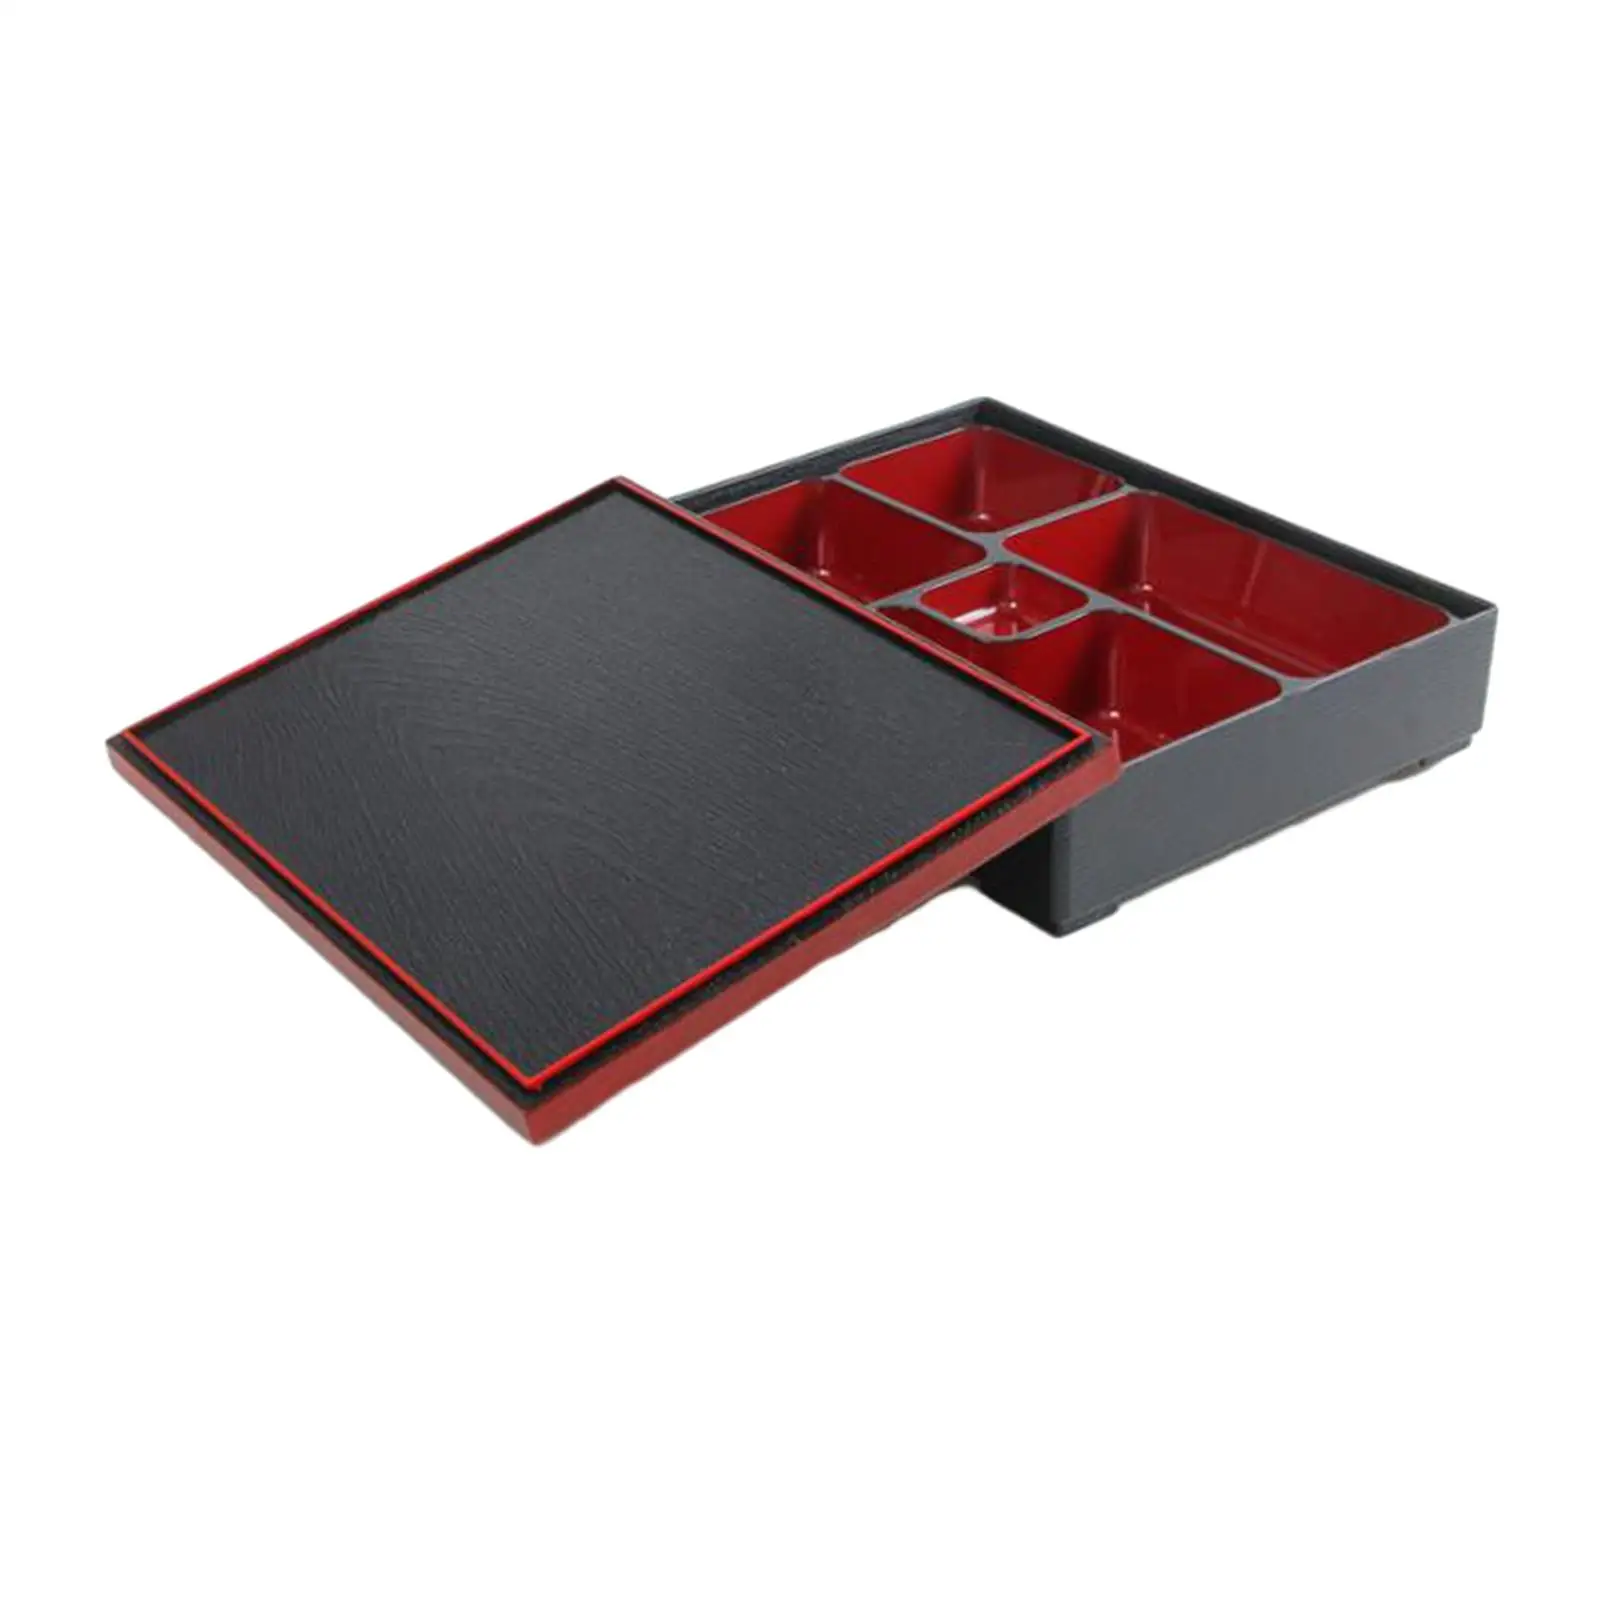 Japanese Bento Box Japanese Sushi Tray Lunch Bento Box Serving Dish for Home Restaurant Business Picnic Sushi, Rice, Sauce